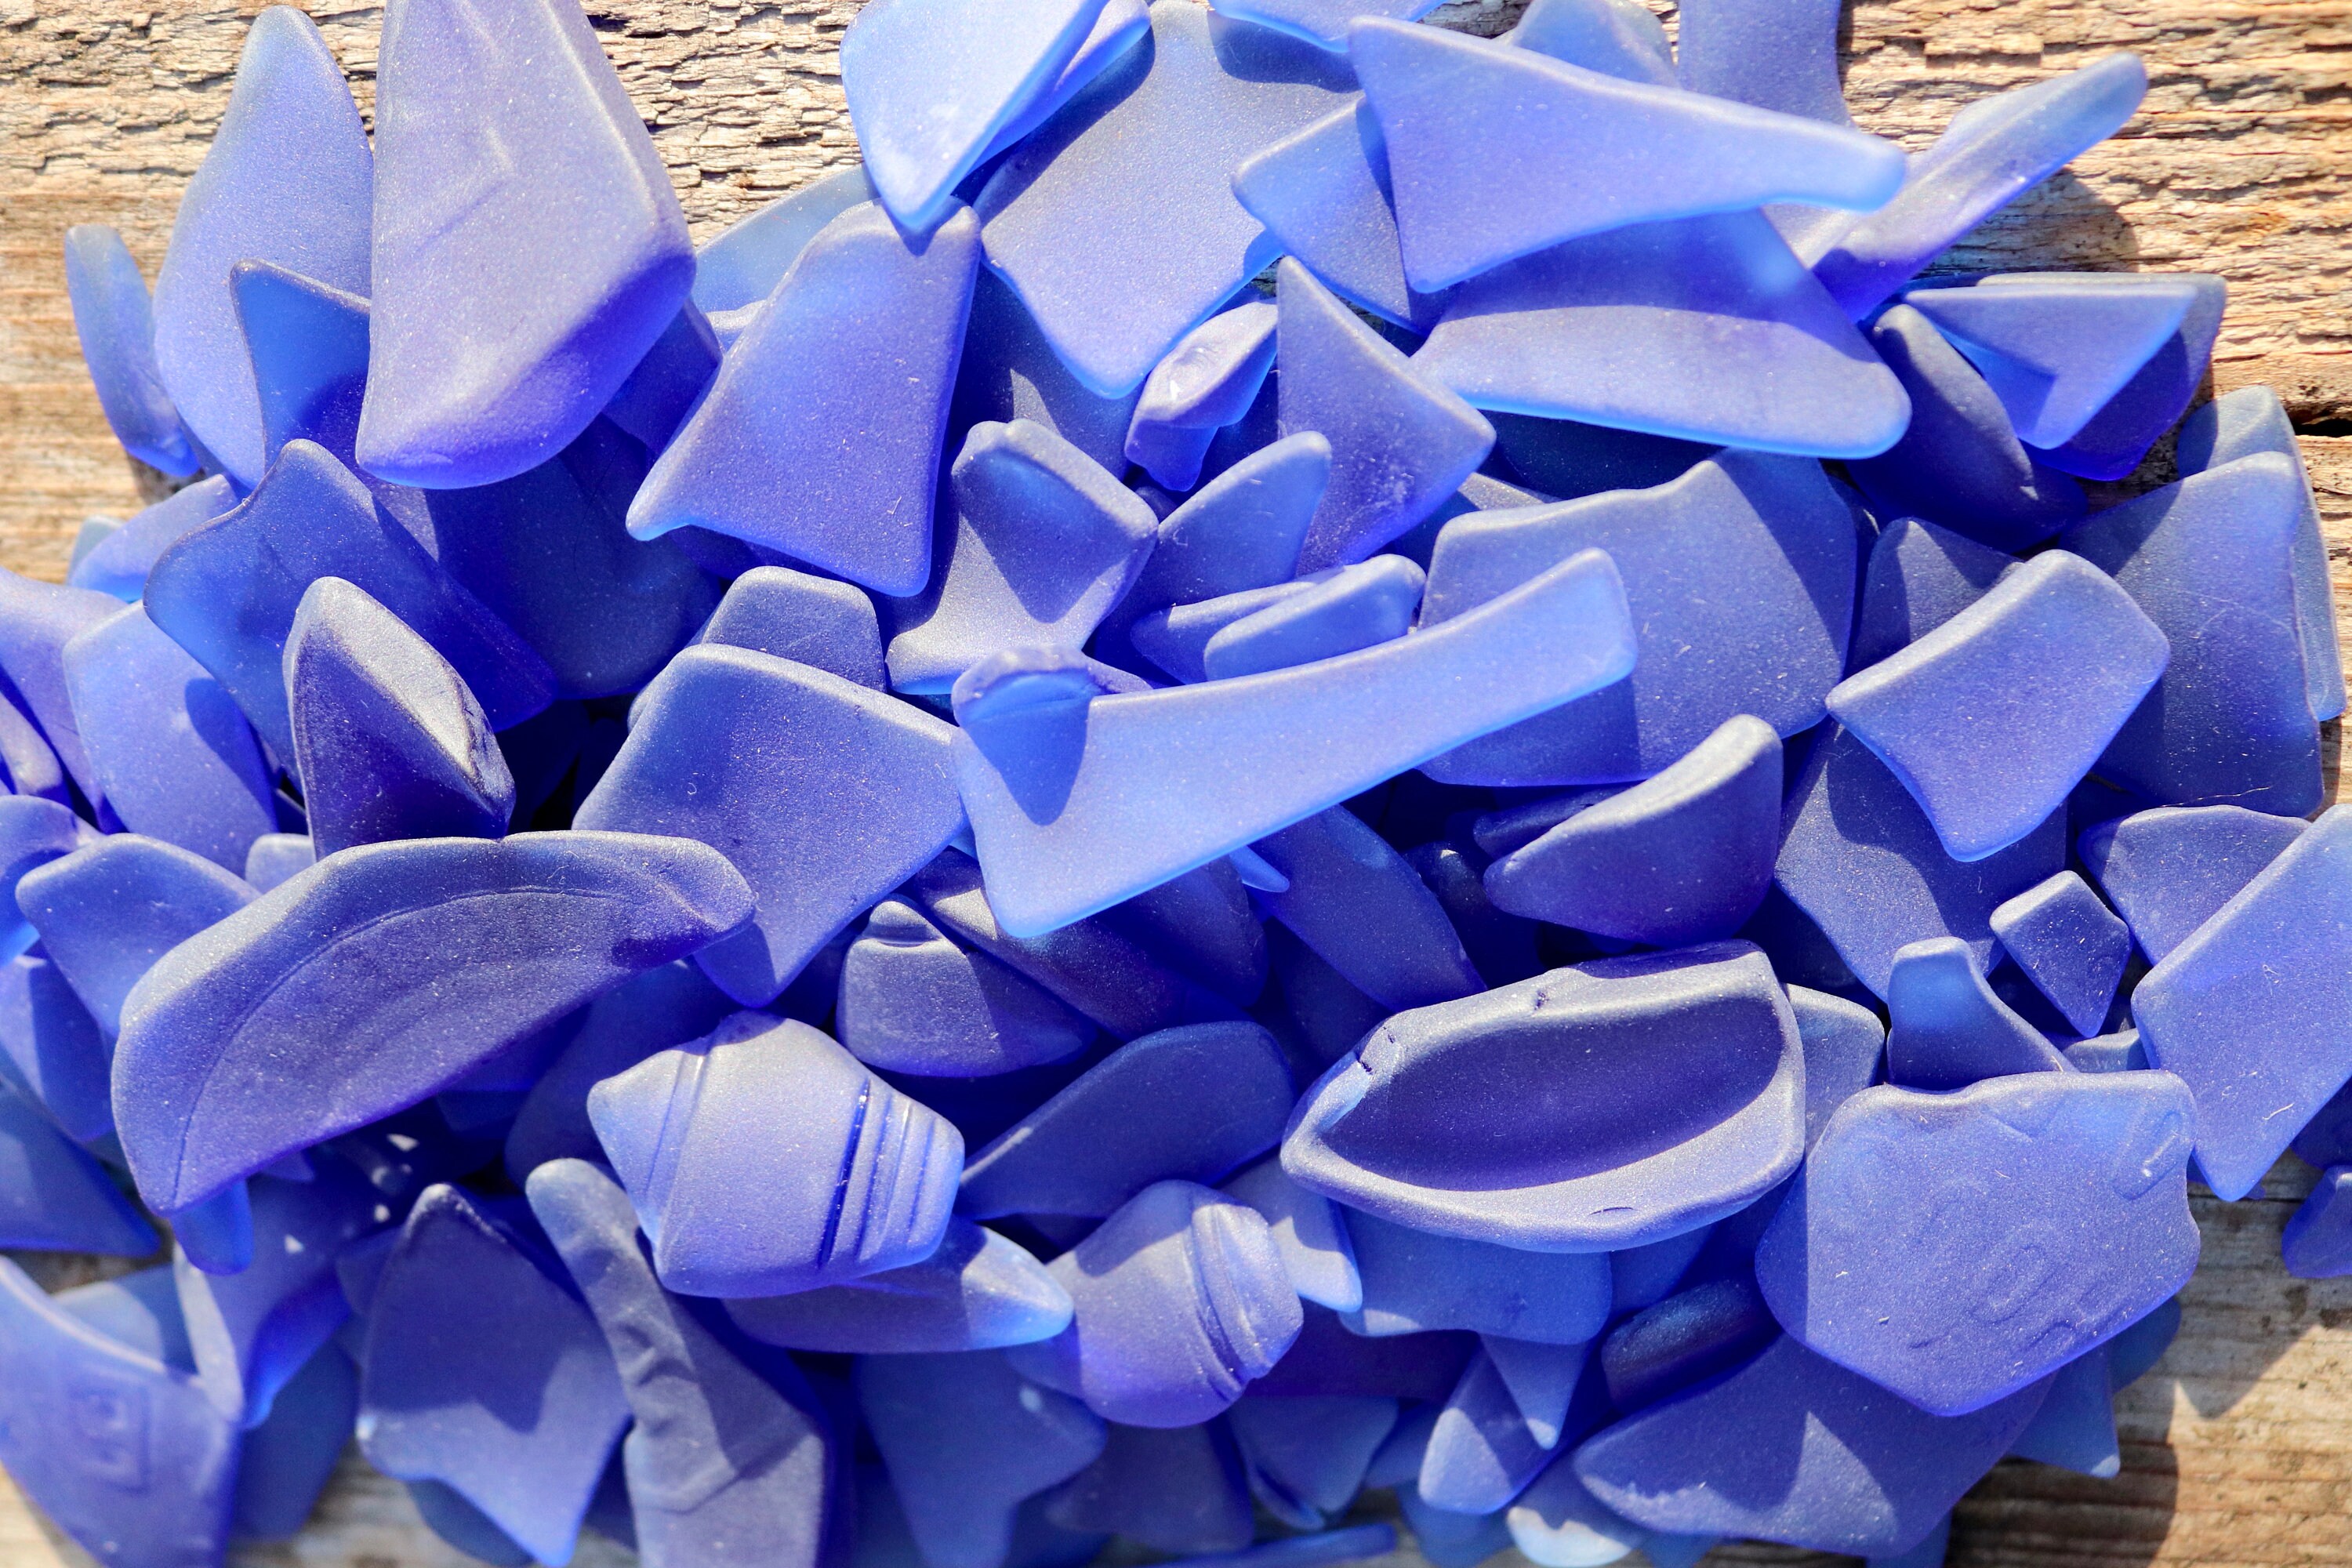 Cobalt Blue Sea Glass, Tumbled, Weathered, Large Size Pieces Average Size  20-40mm, Ideal for Jewellery, Mosaics, Craft.. 